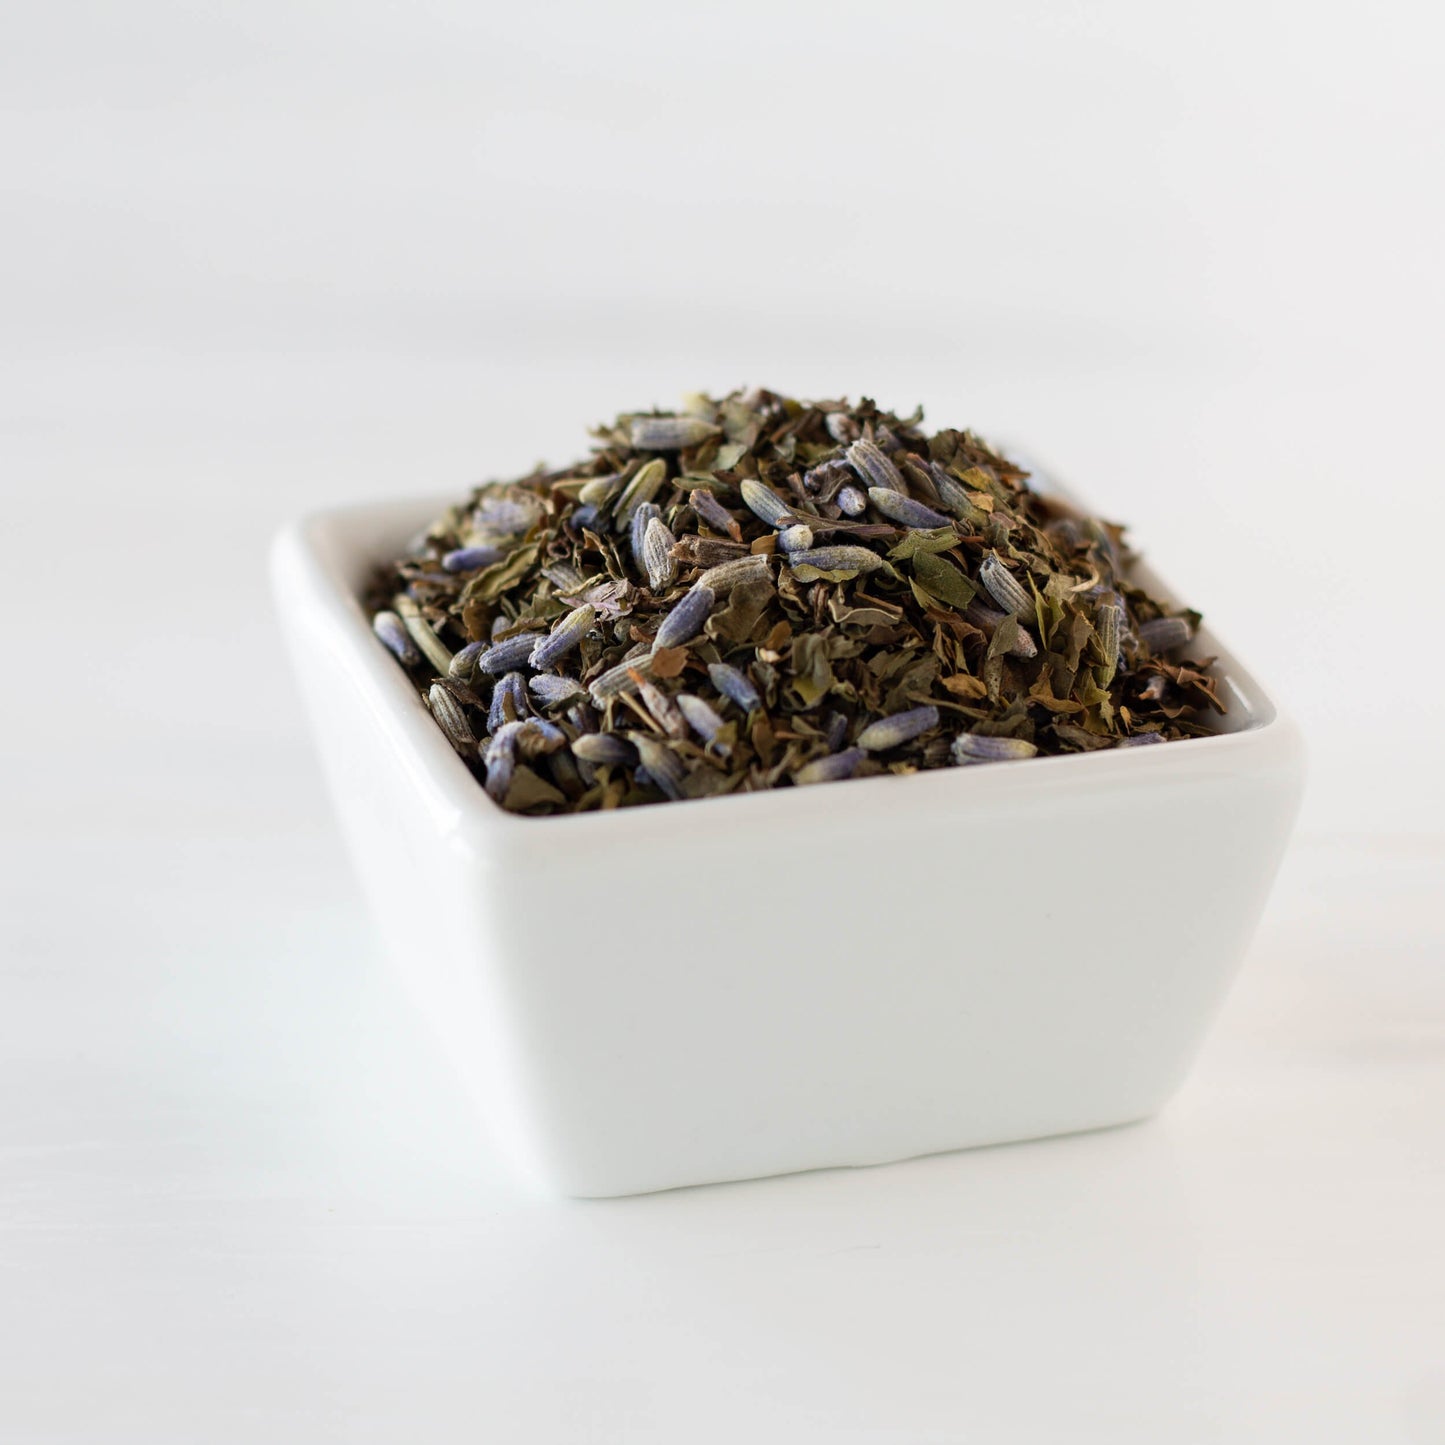 Lavender Mint Organic Herbal Tea shown in close up as loose tea leaves in a small square white dish